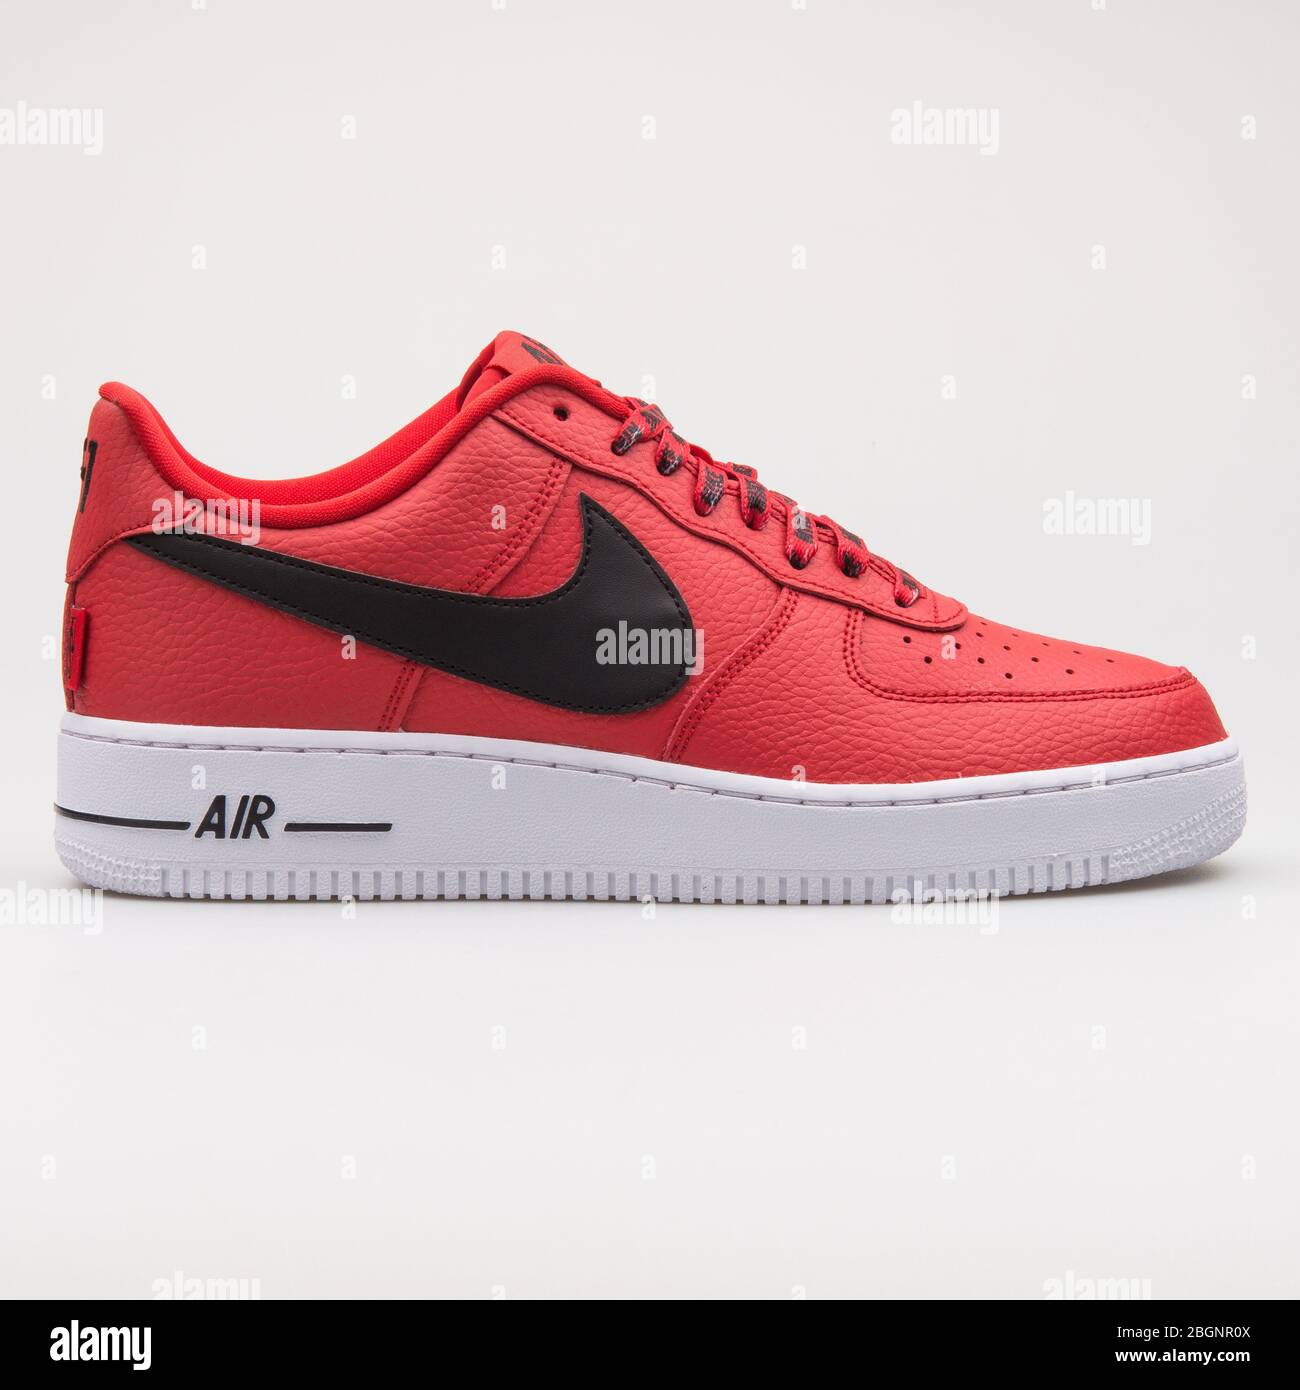 VIENNA, AUSTRIA - AUGUST 22, 2017: Nike Air Force 1 07 LV8 red, black and  white sneaker on white background Stock Photo - Alamy